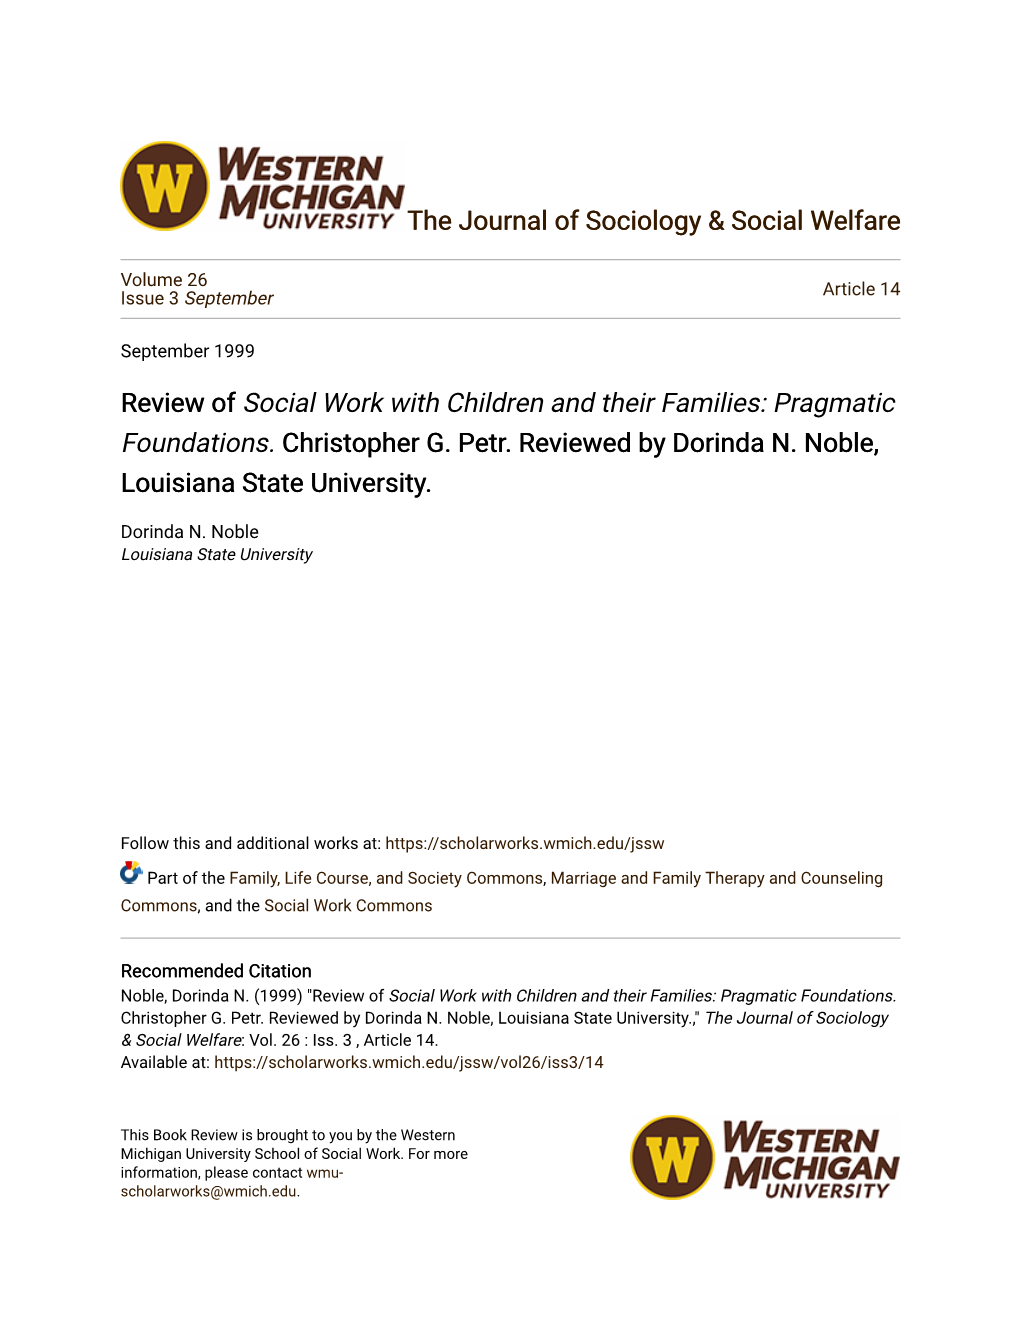 Review of Social Work with Children and Their Families: Pragmatic Foundations